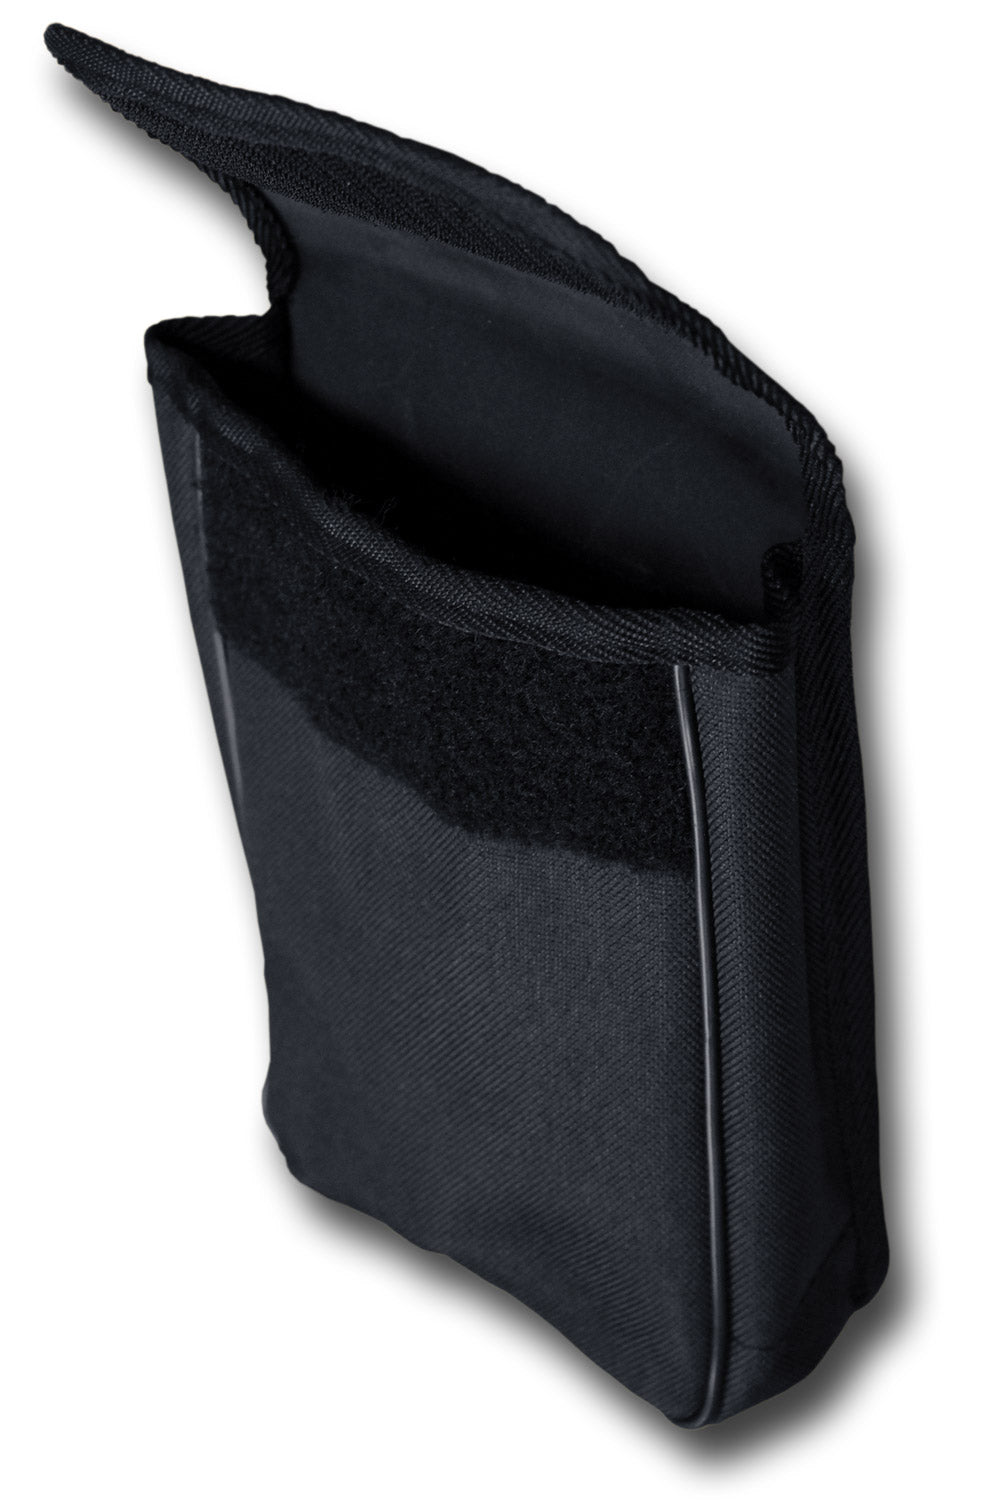 POLICE NYLON DOCUMENT POUCH - OPEN